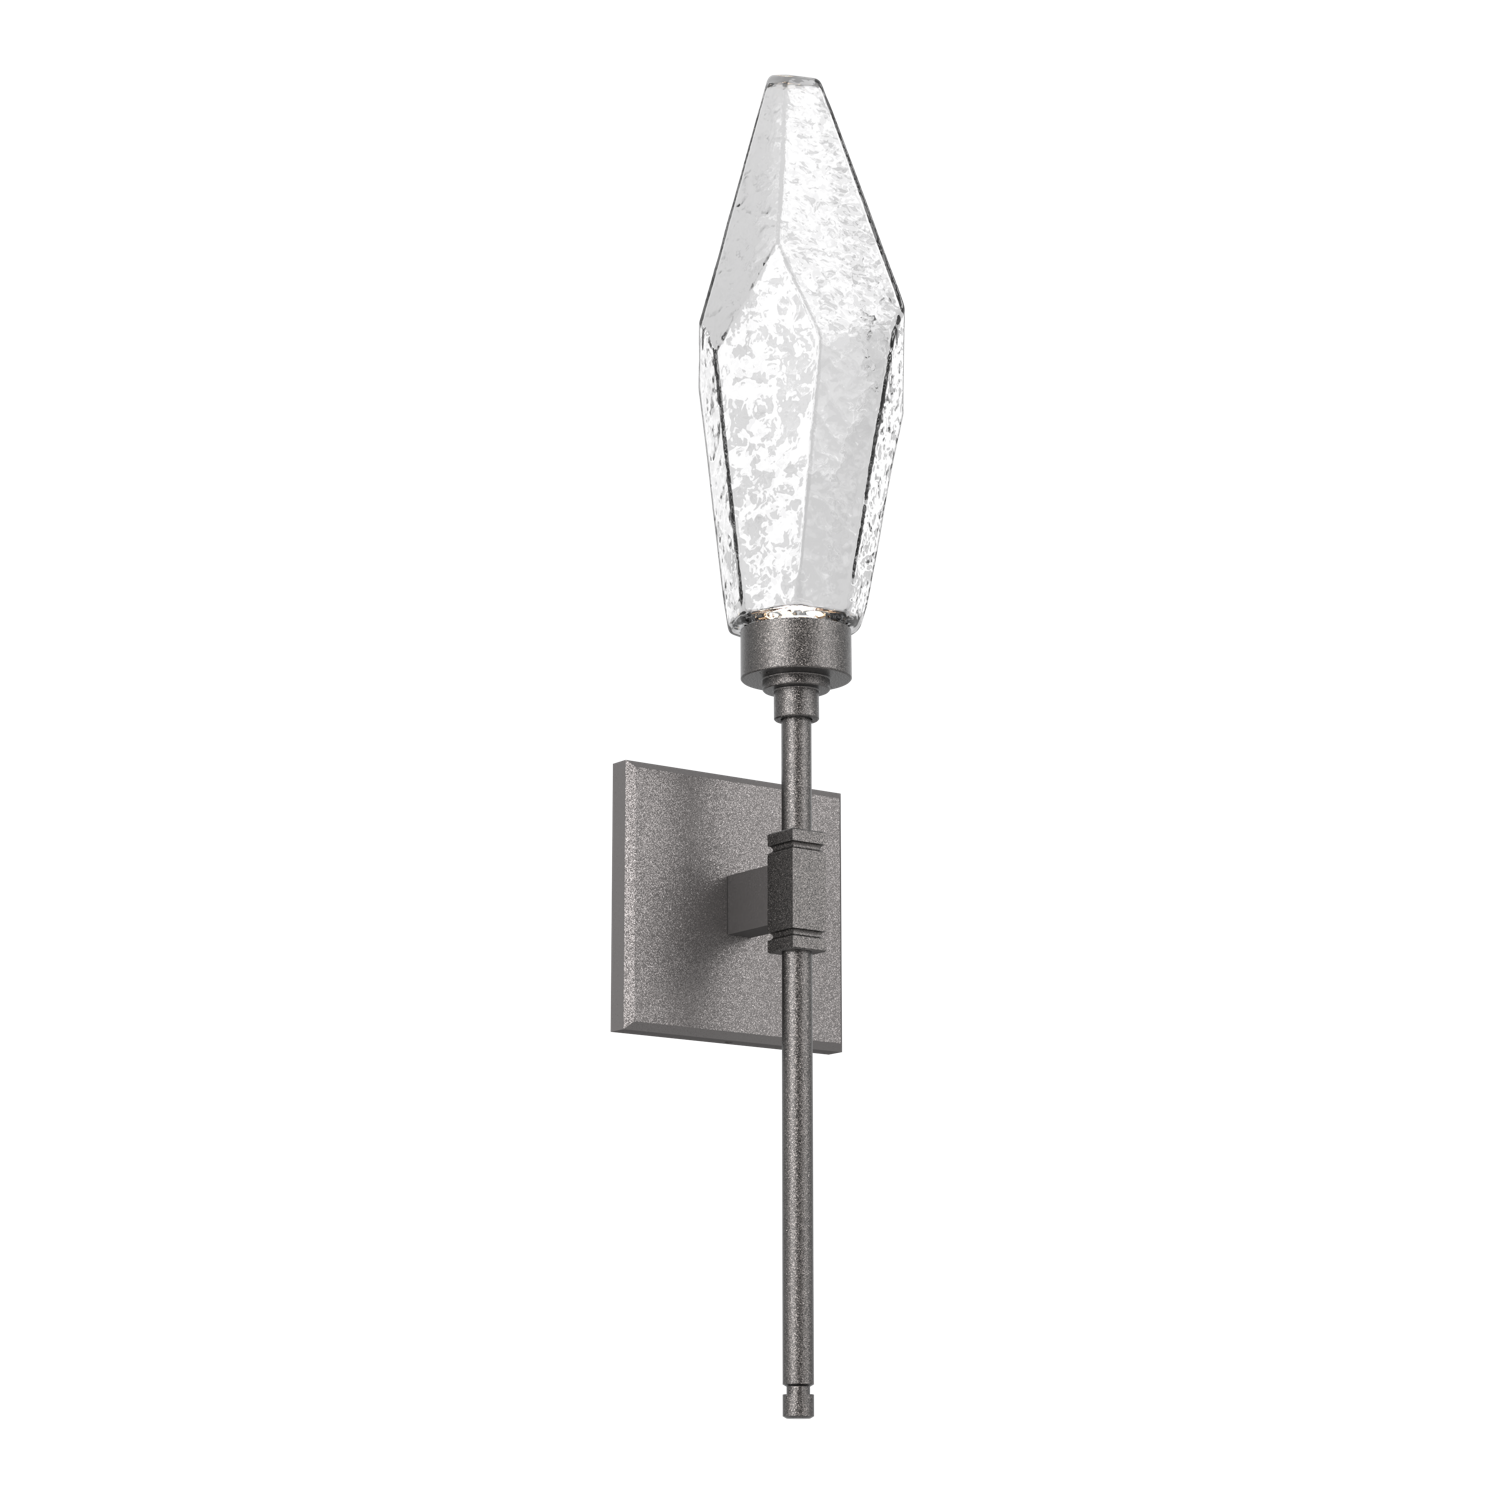 IDB0050-04-GP-CC-Hammerton-Studio-Rock-Crystal-ada-certified-belvedere-wall-sconce-with-graphite-finish-and-clear-glass-shades-and-LED-lamping